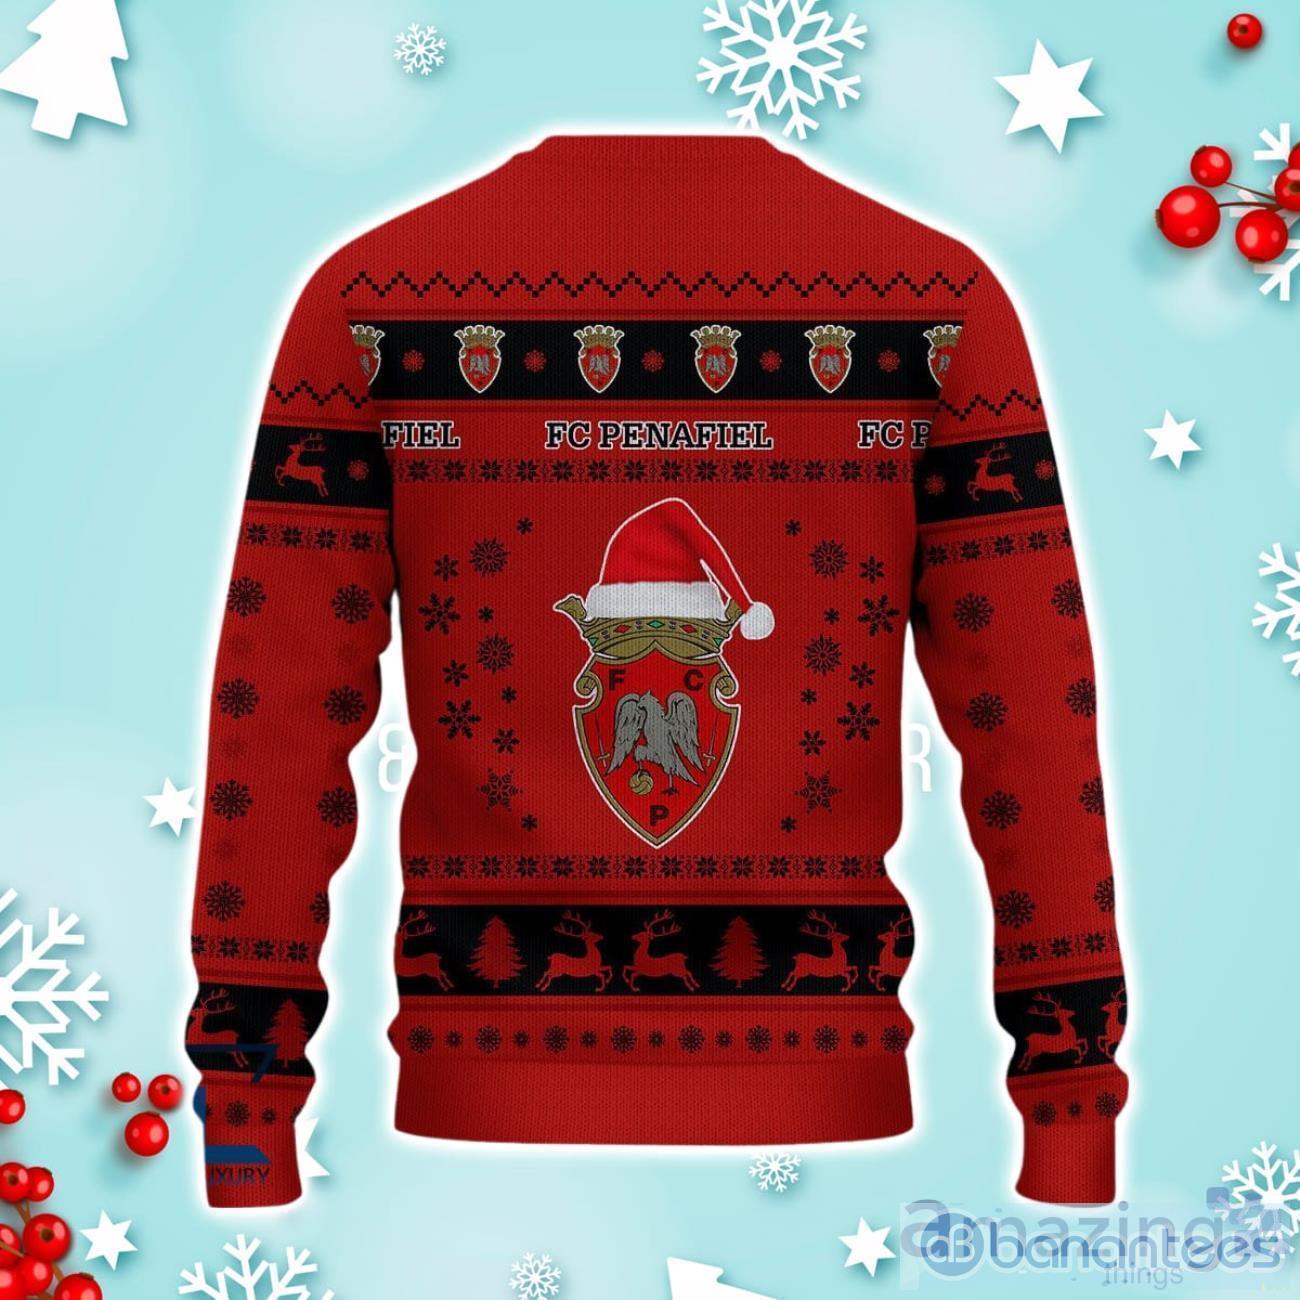 Club Brugge KV Ugly Christmas Sweater Ideal Gift For Fans - Banantees